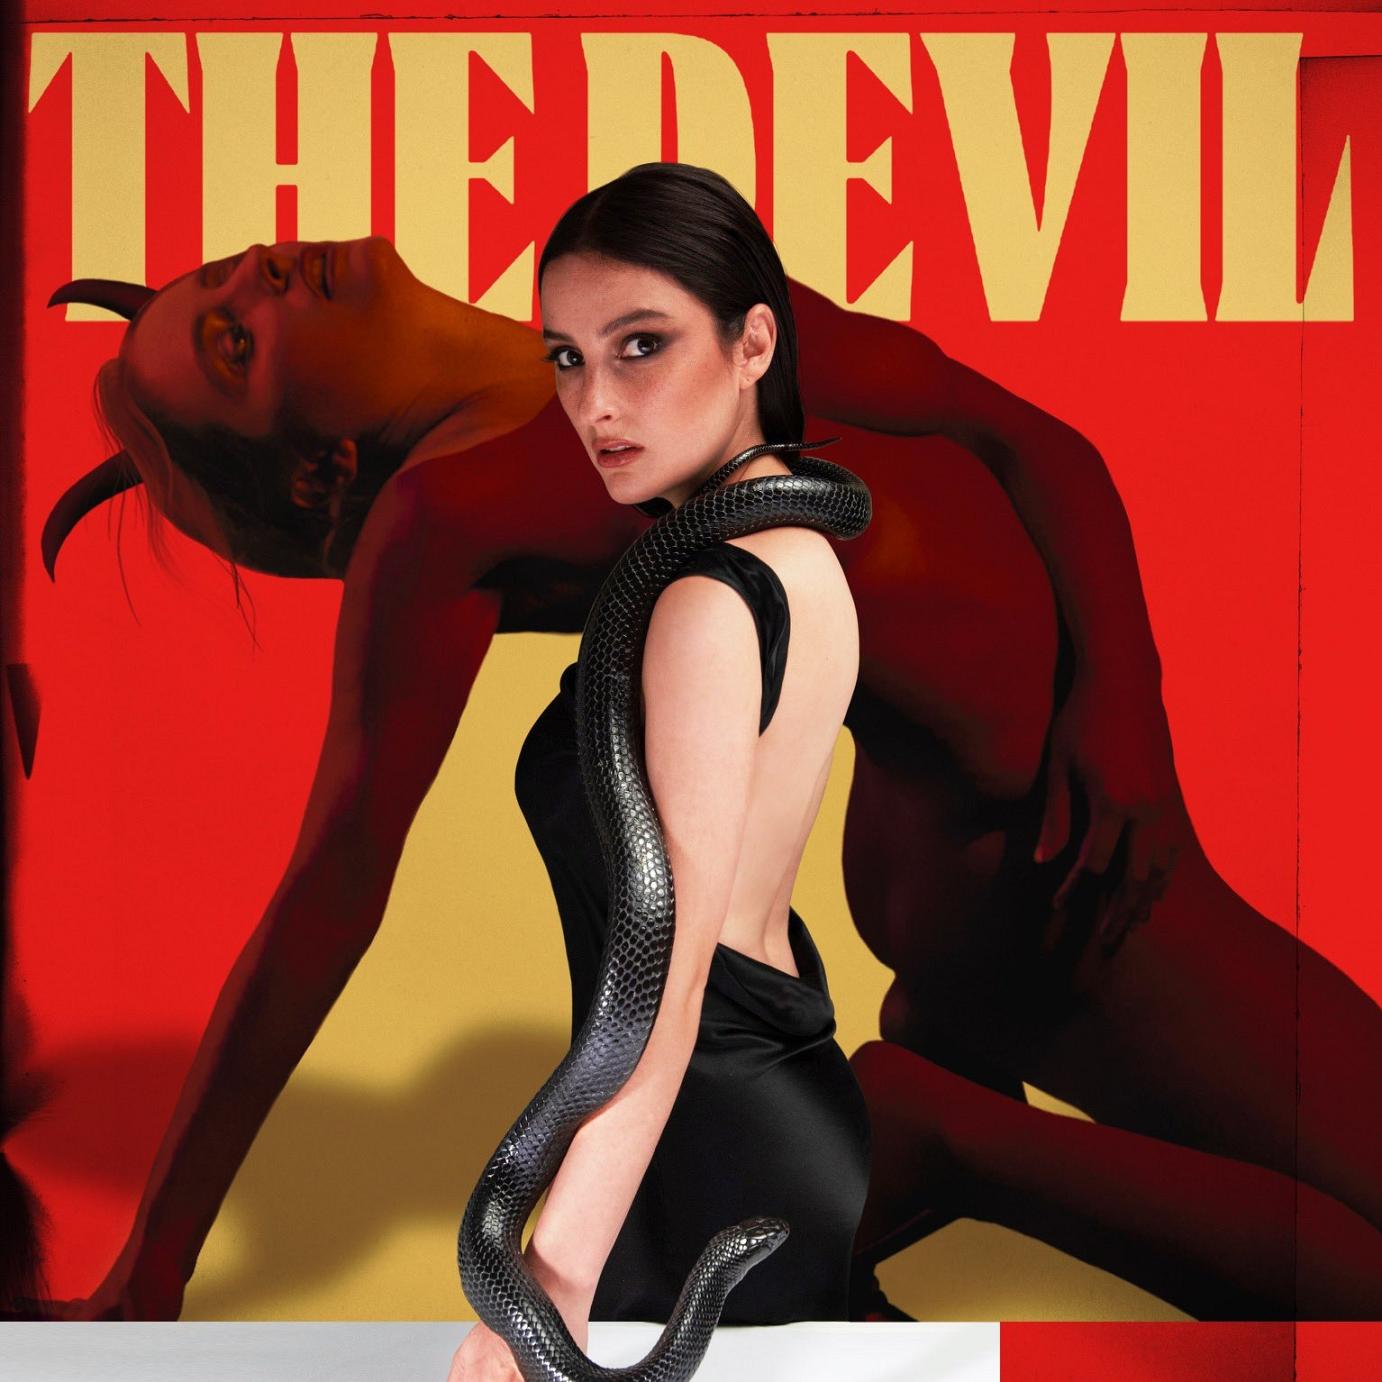 CoqCreative power by ProductionLink s.r.l. Banks-The-Devil-Single-Cover Banks-The-Devil-Single-Cover  Banks-The-Devil-Single-Cover